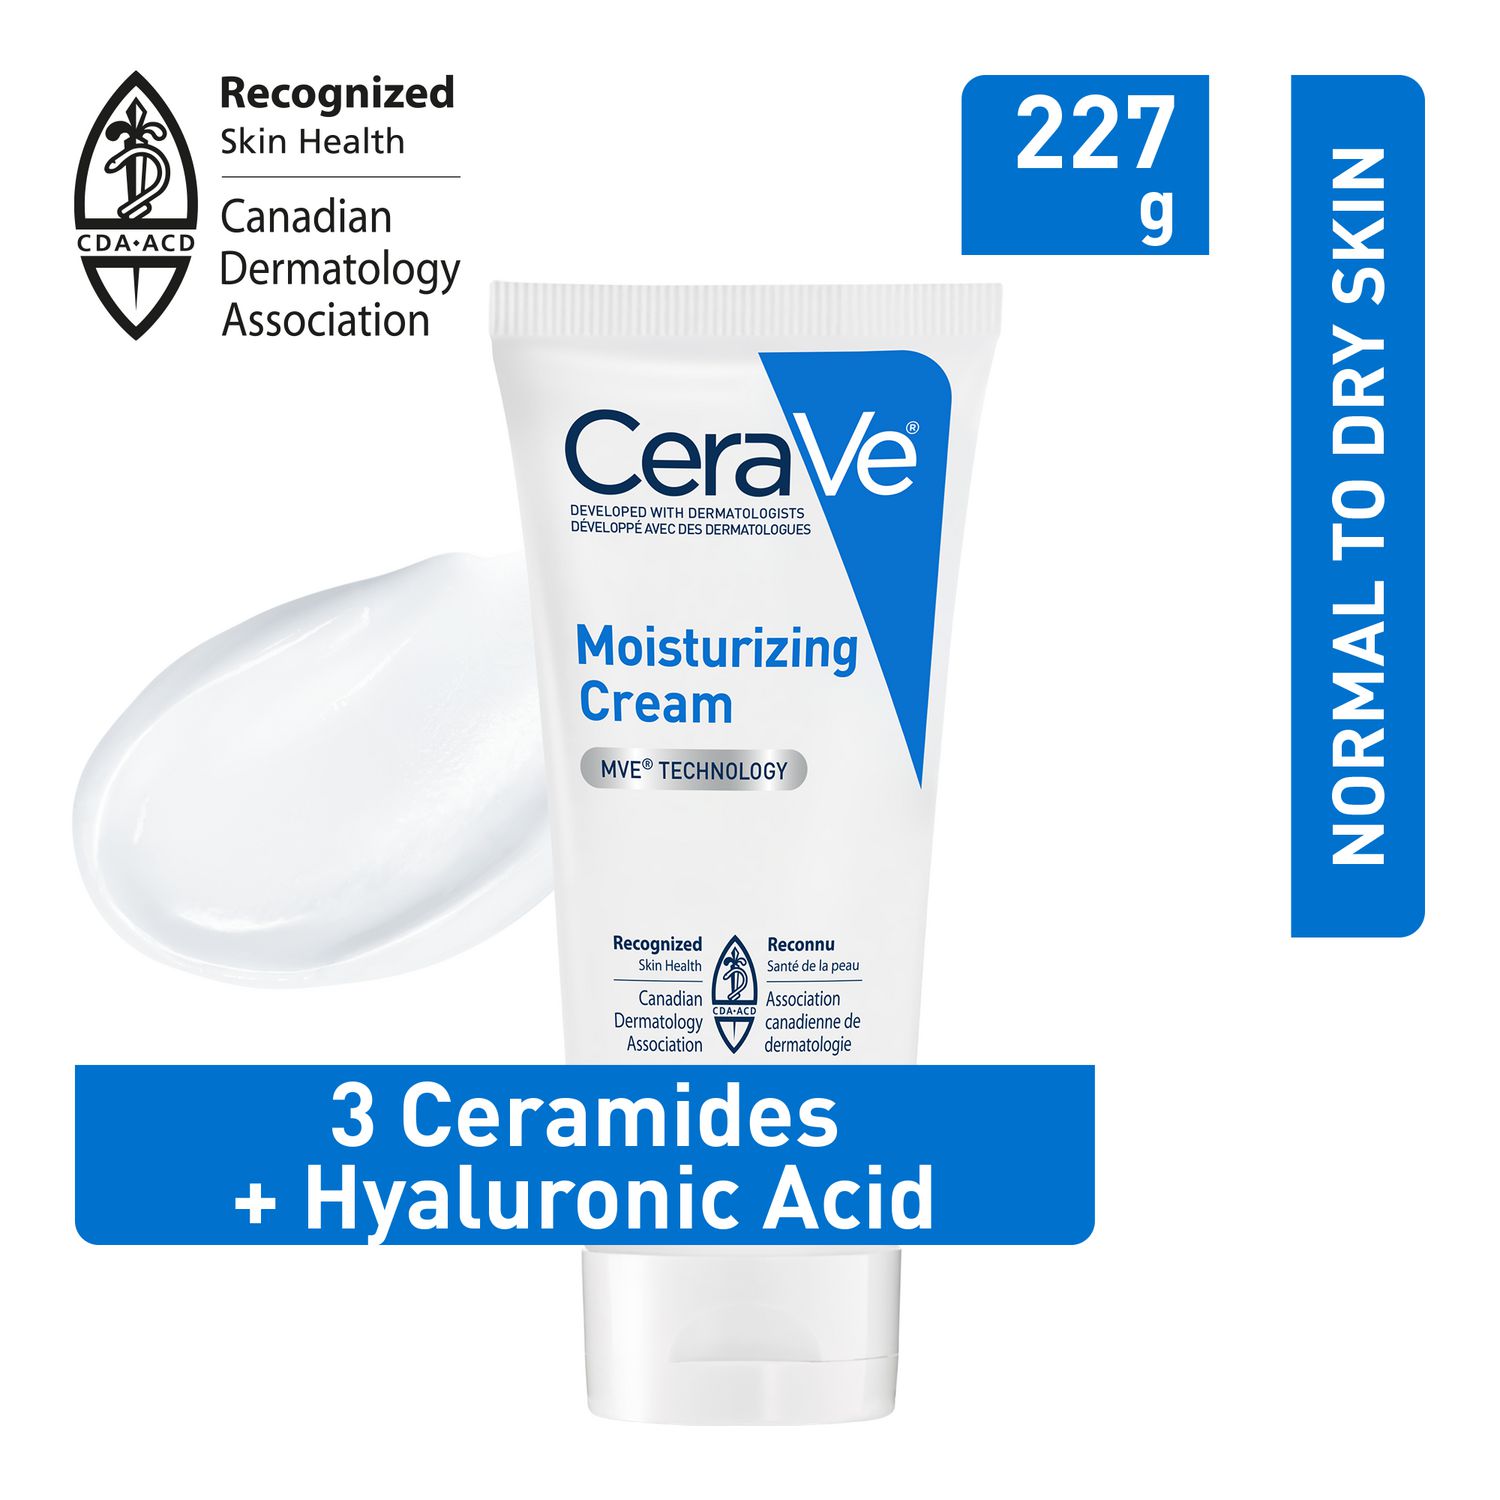 CeraVe Moisturizing Cream with 3 Ceramides and Hyaluronic Acid | Daily Face, Body and Hand Moisturizer for Normal to Dry Skin, Women & Men | Non-Comedogenic, Oil-free, and Fragrance Free -